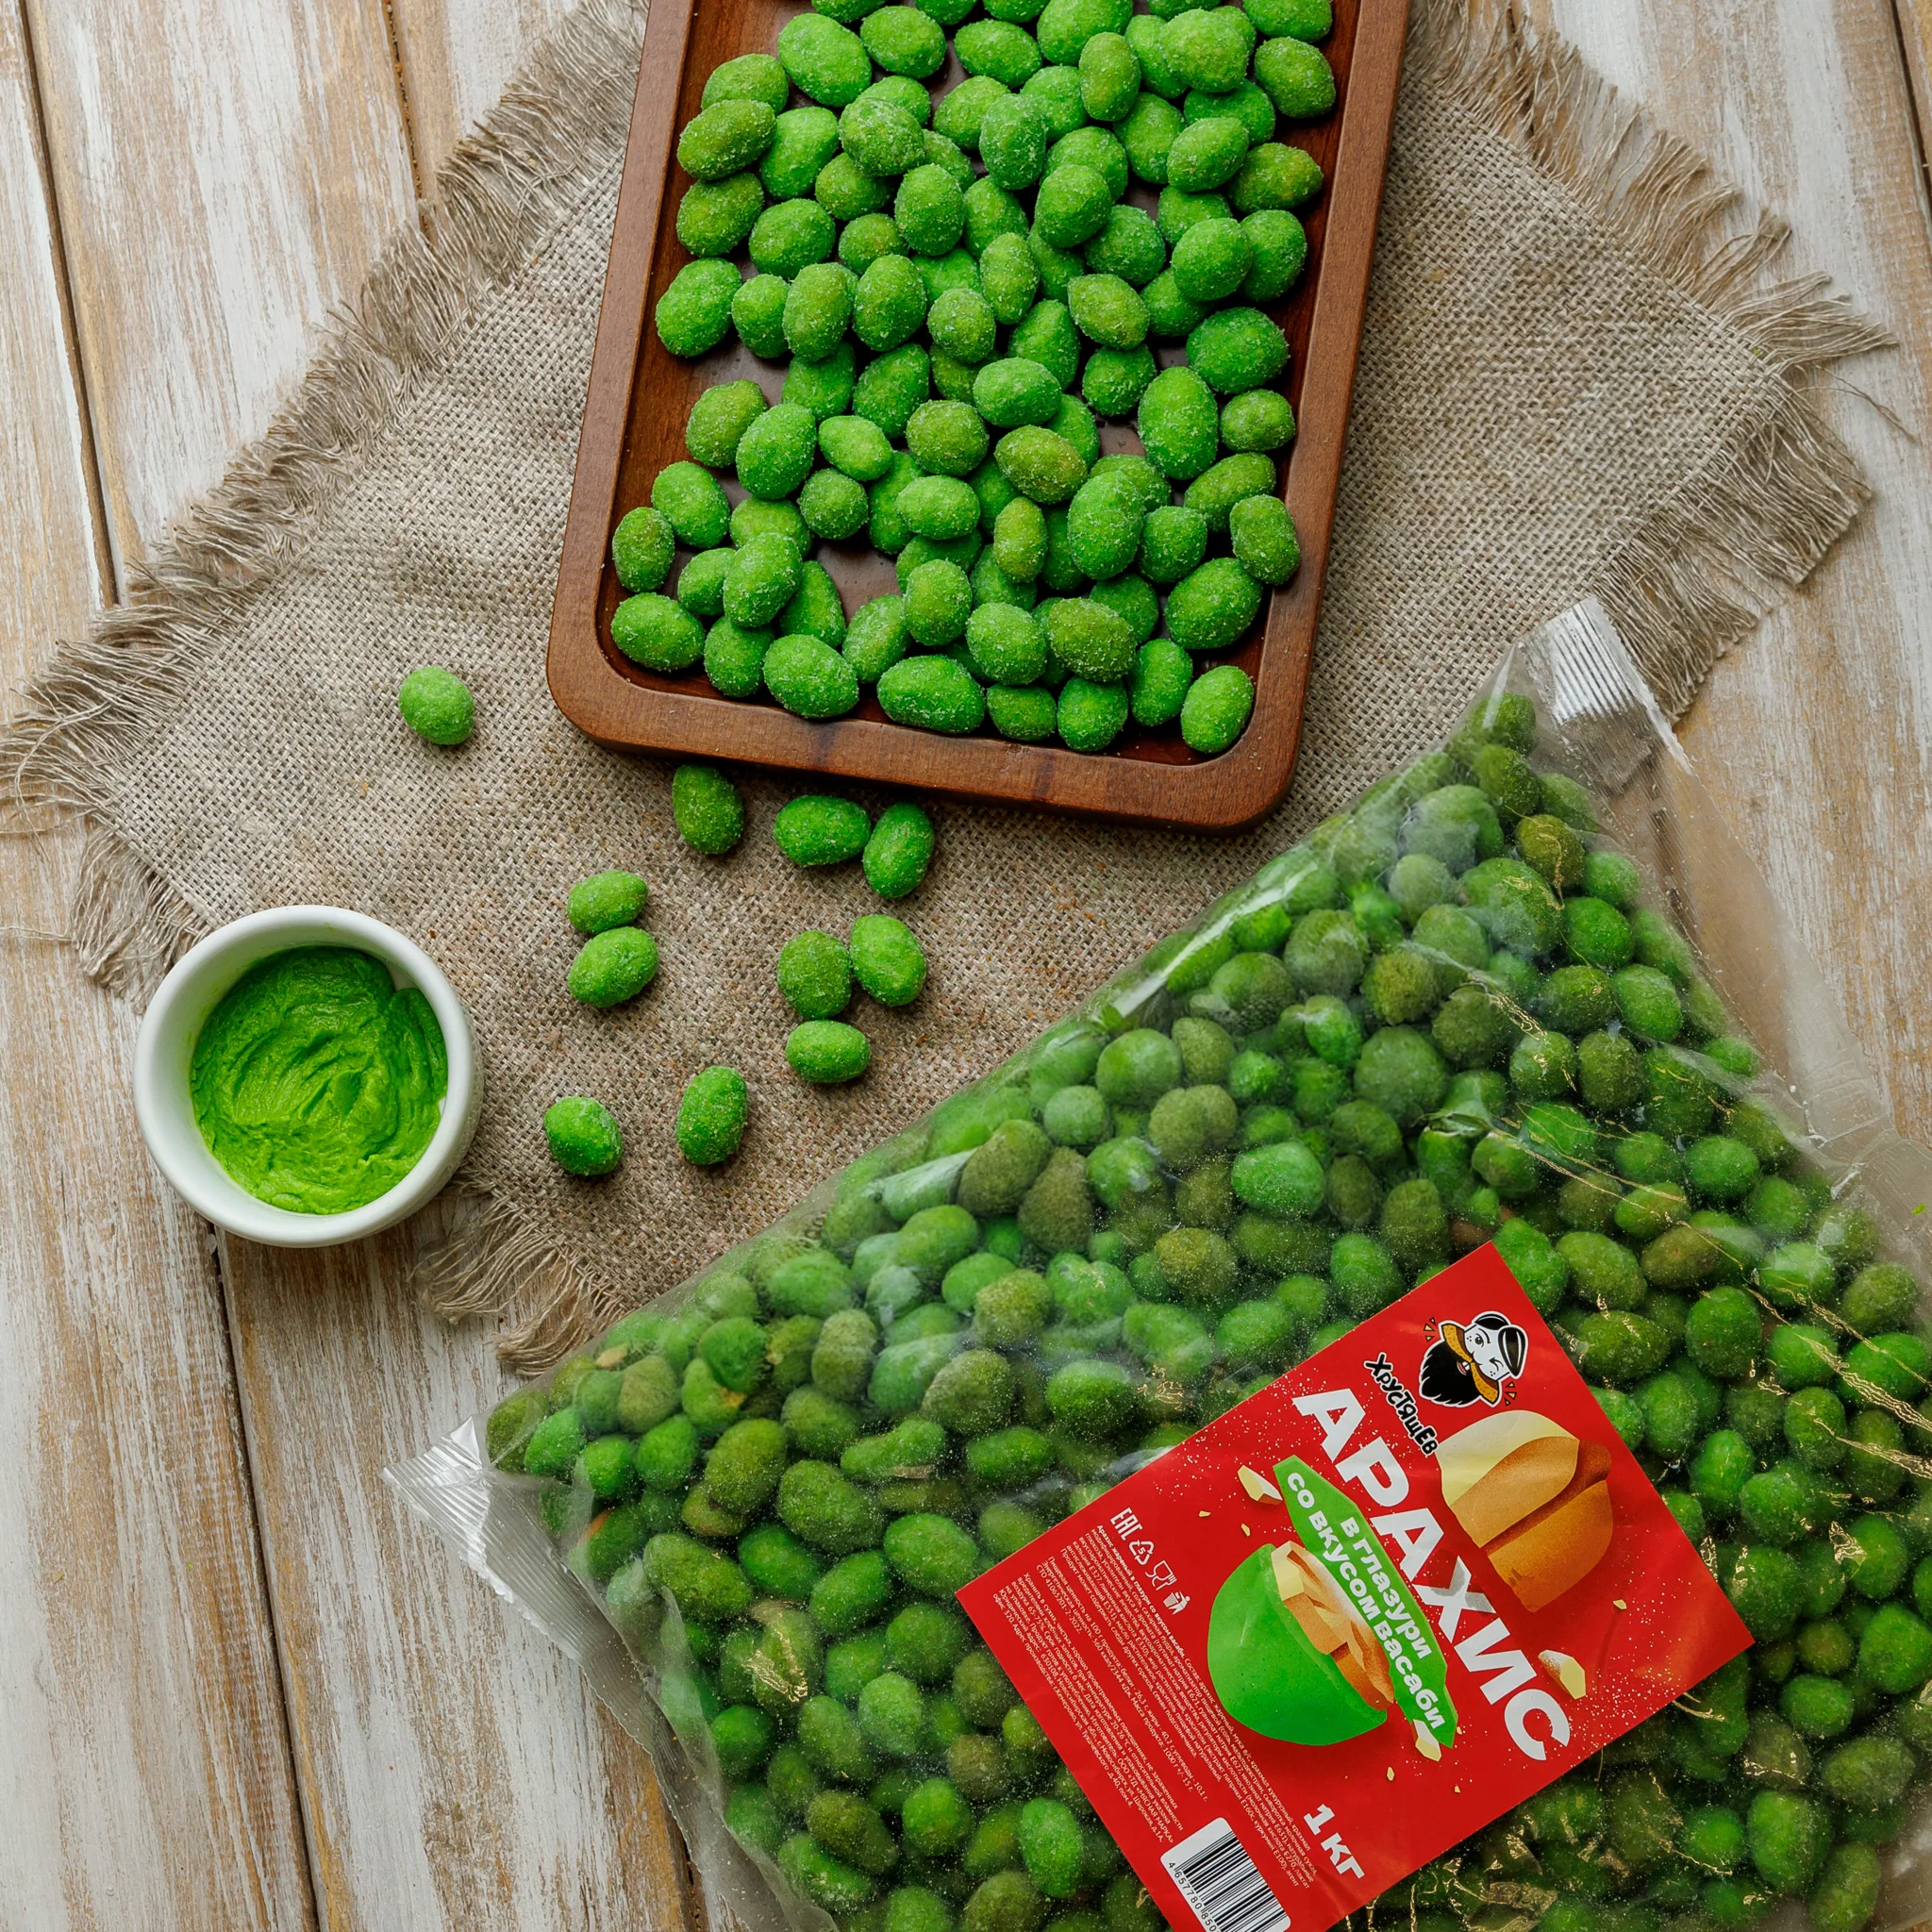 Peanuts in glaze with Wasabi flavor package 1000 g./Snacks 